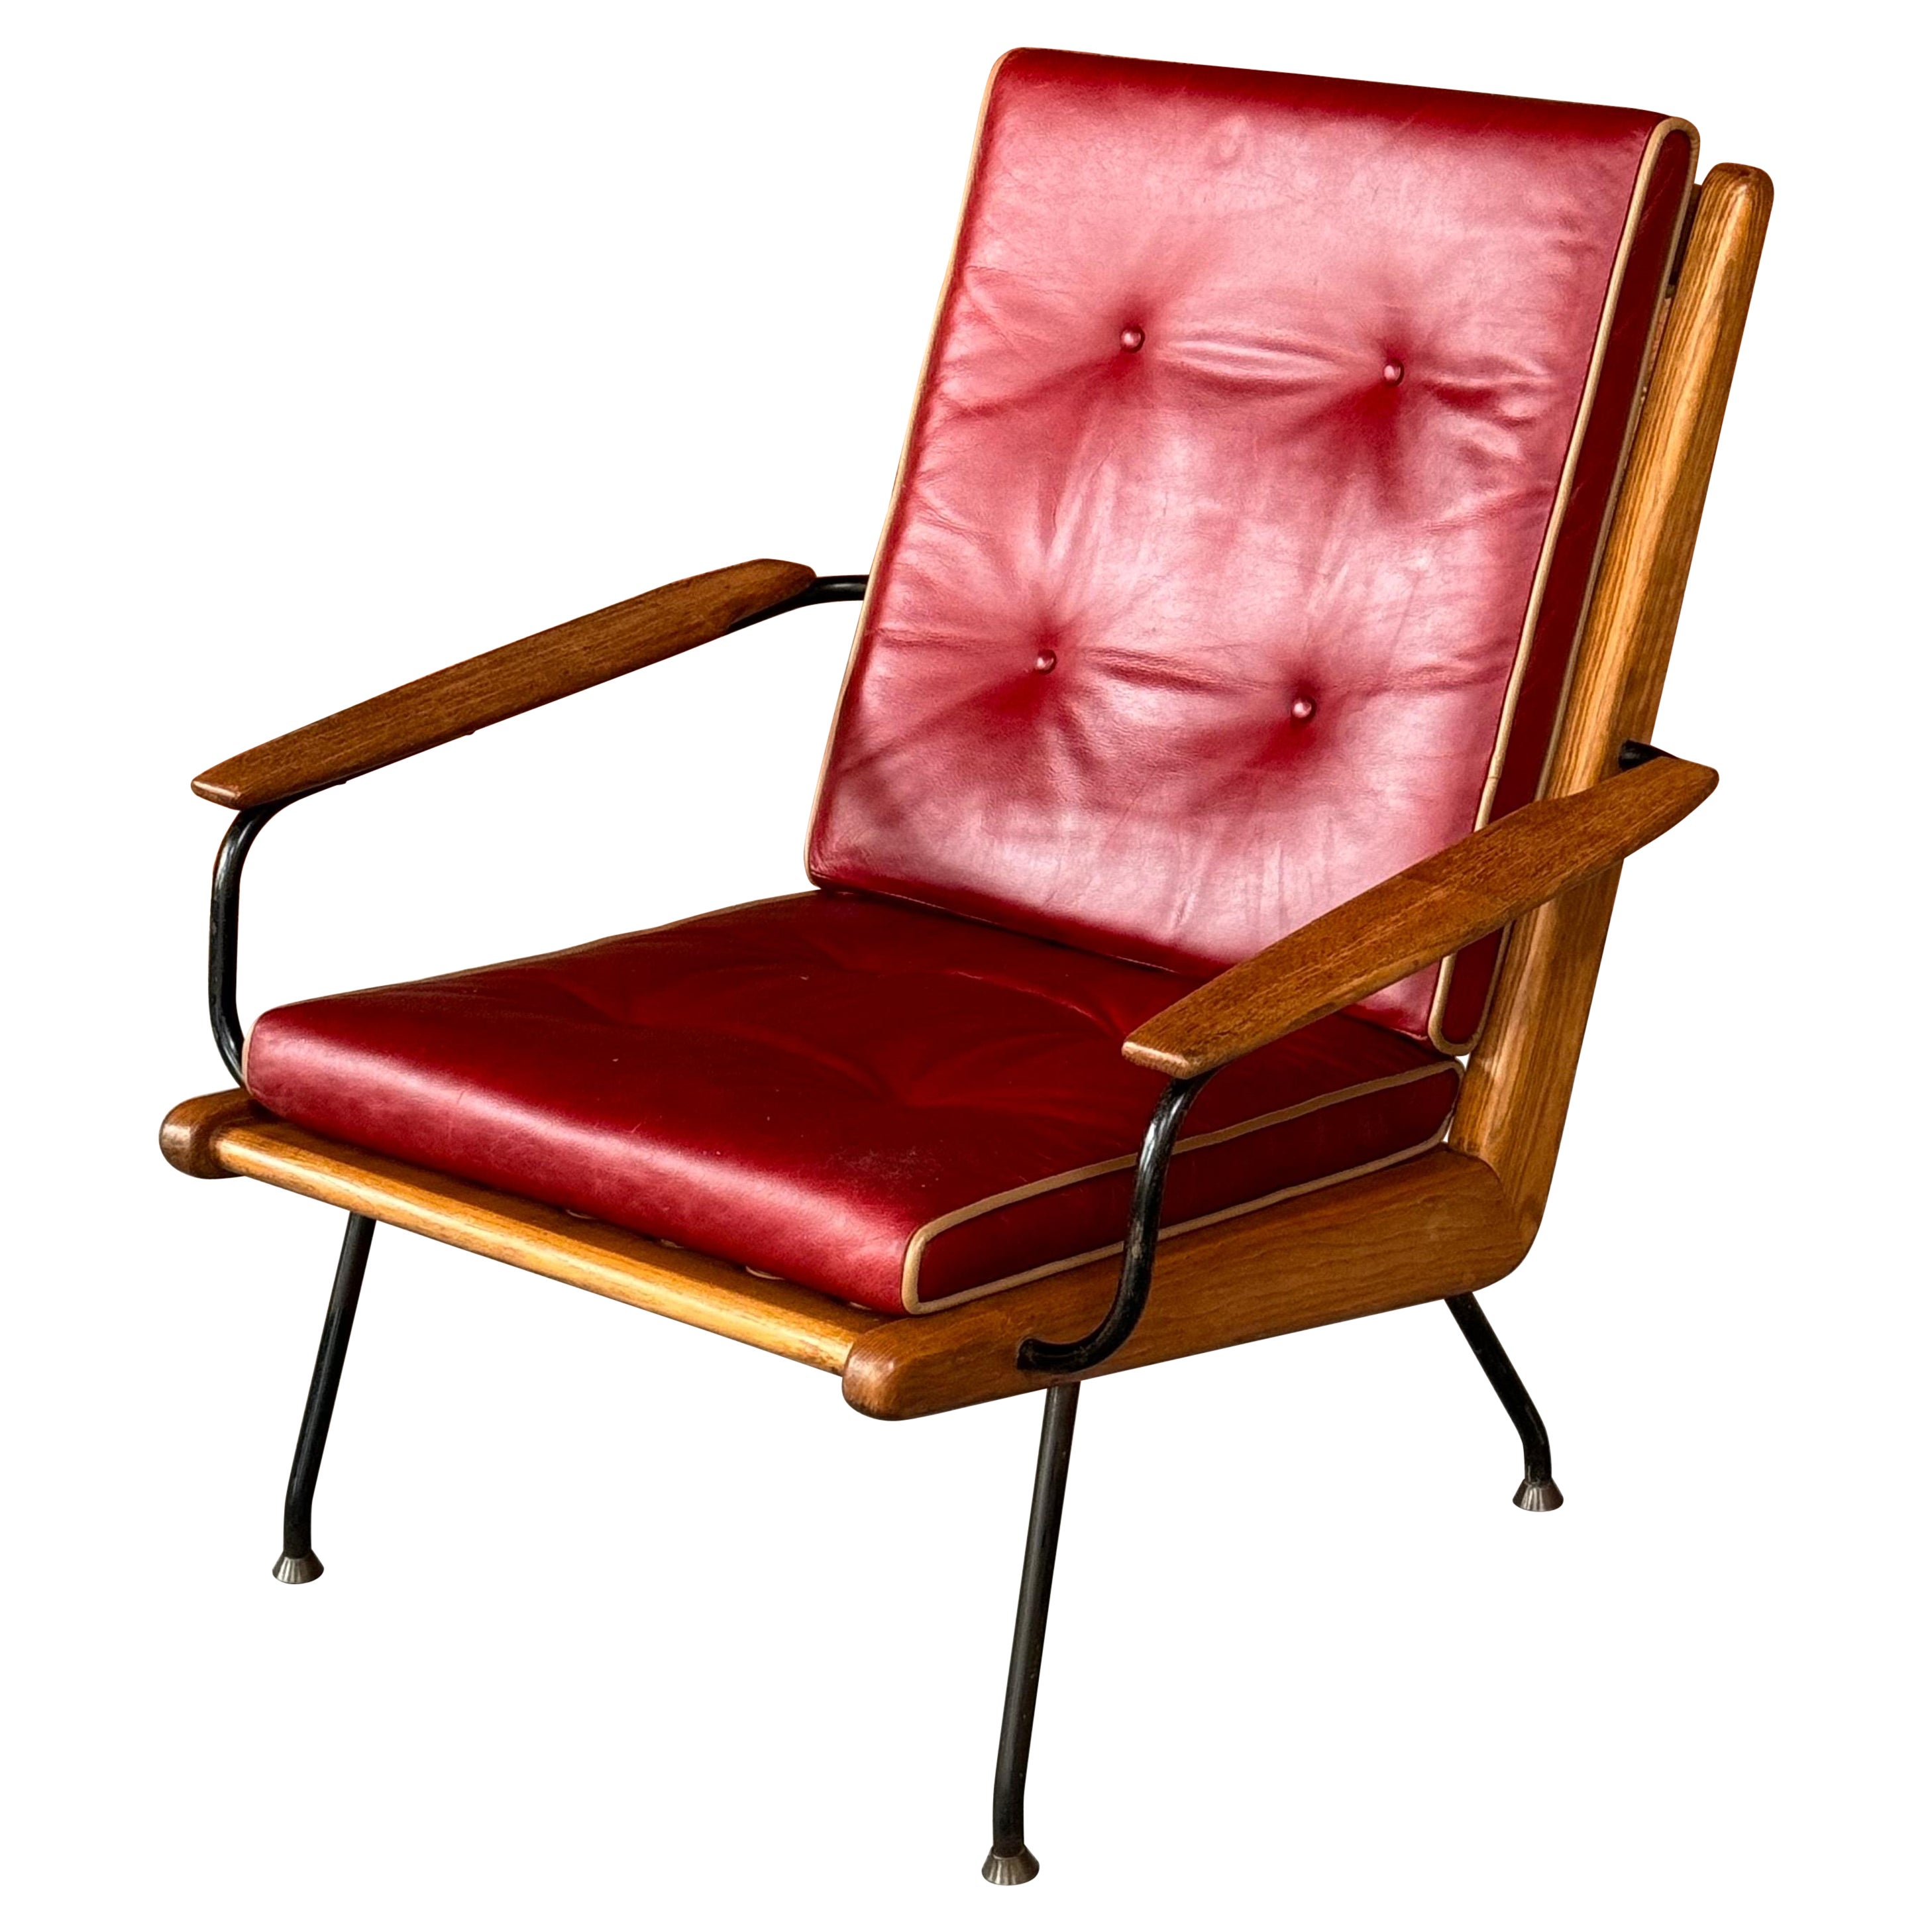 1950s European Armchair in the style of Jean Prouve